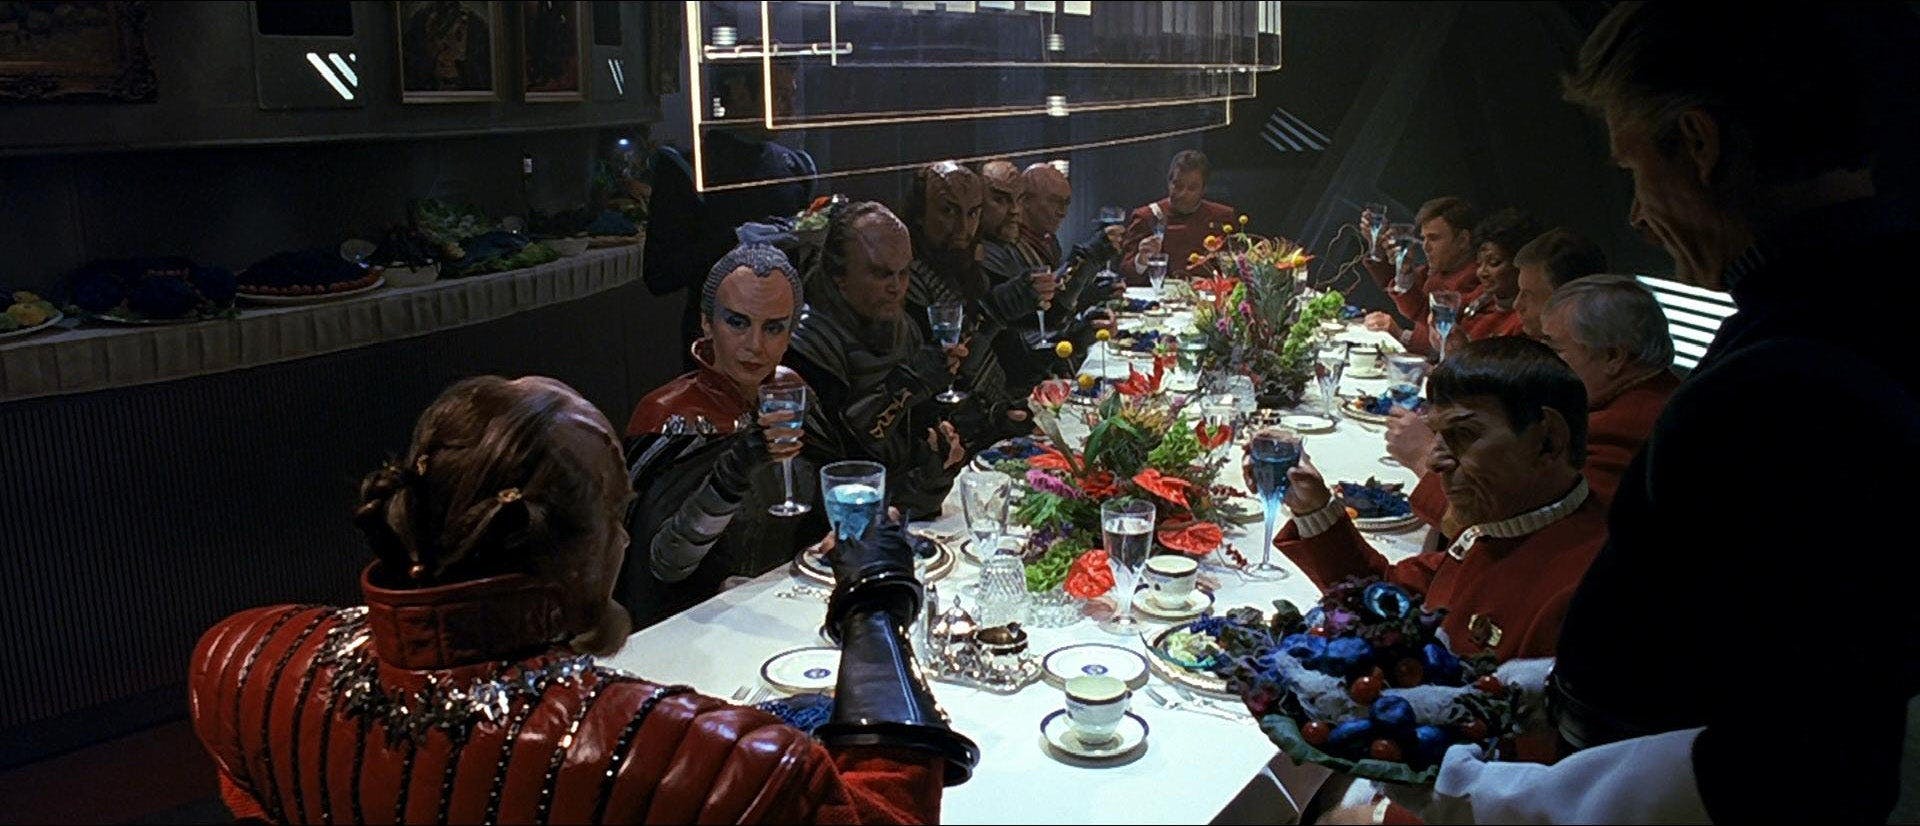 Klingons and the Enterprise crew share an extravagant meal on Star Trek: The Undiscovered Country